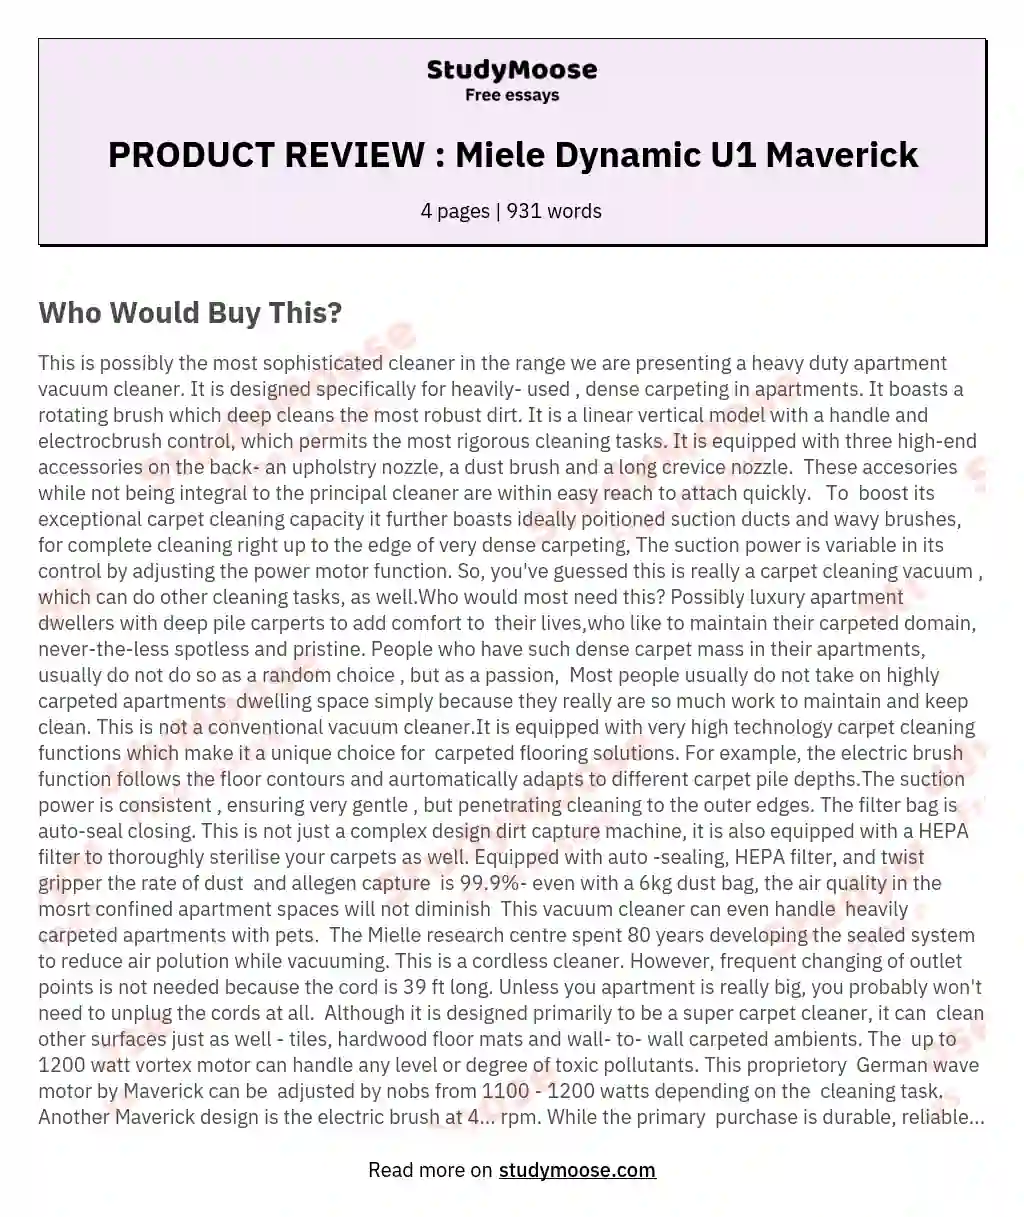 product review essay example